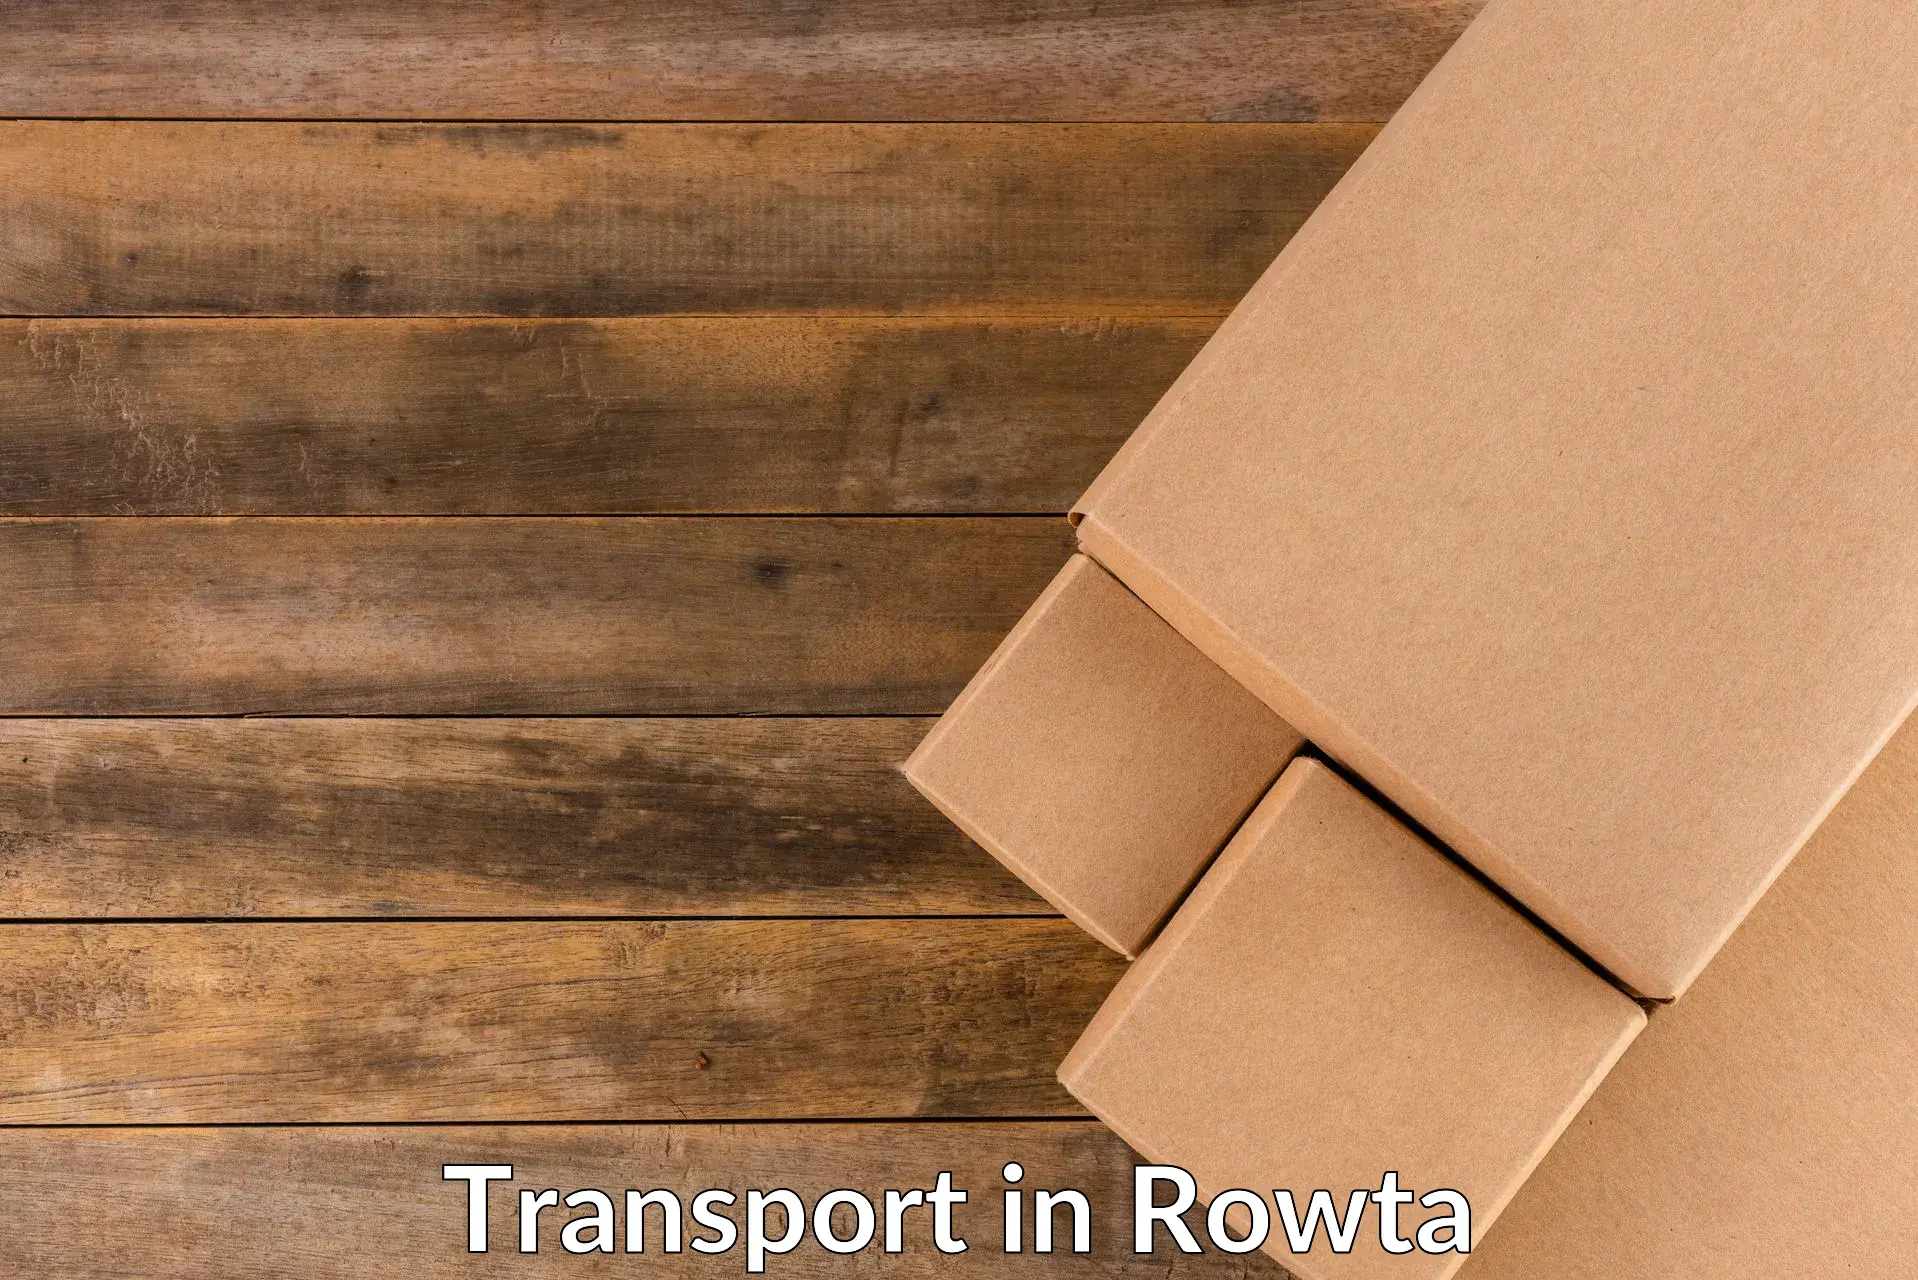 Container transport service in Rowta